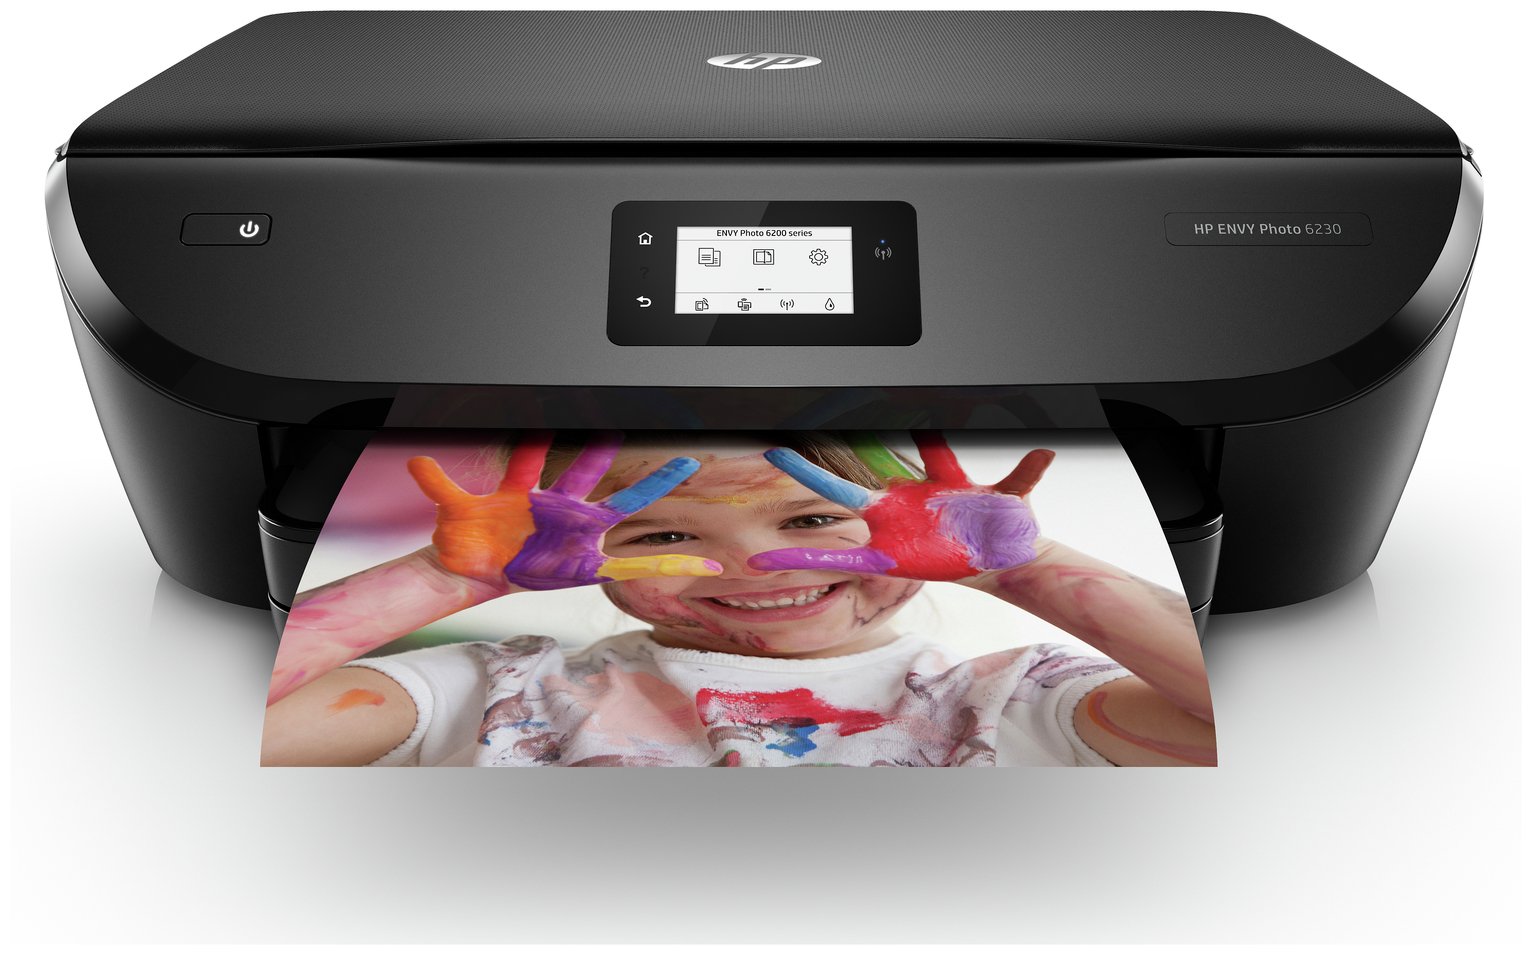 HP Envy 6230 Wireless Photo Printer & 4 Months Instant Ink